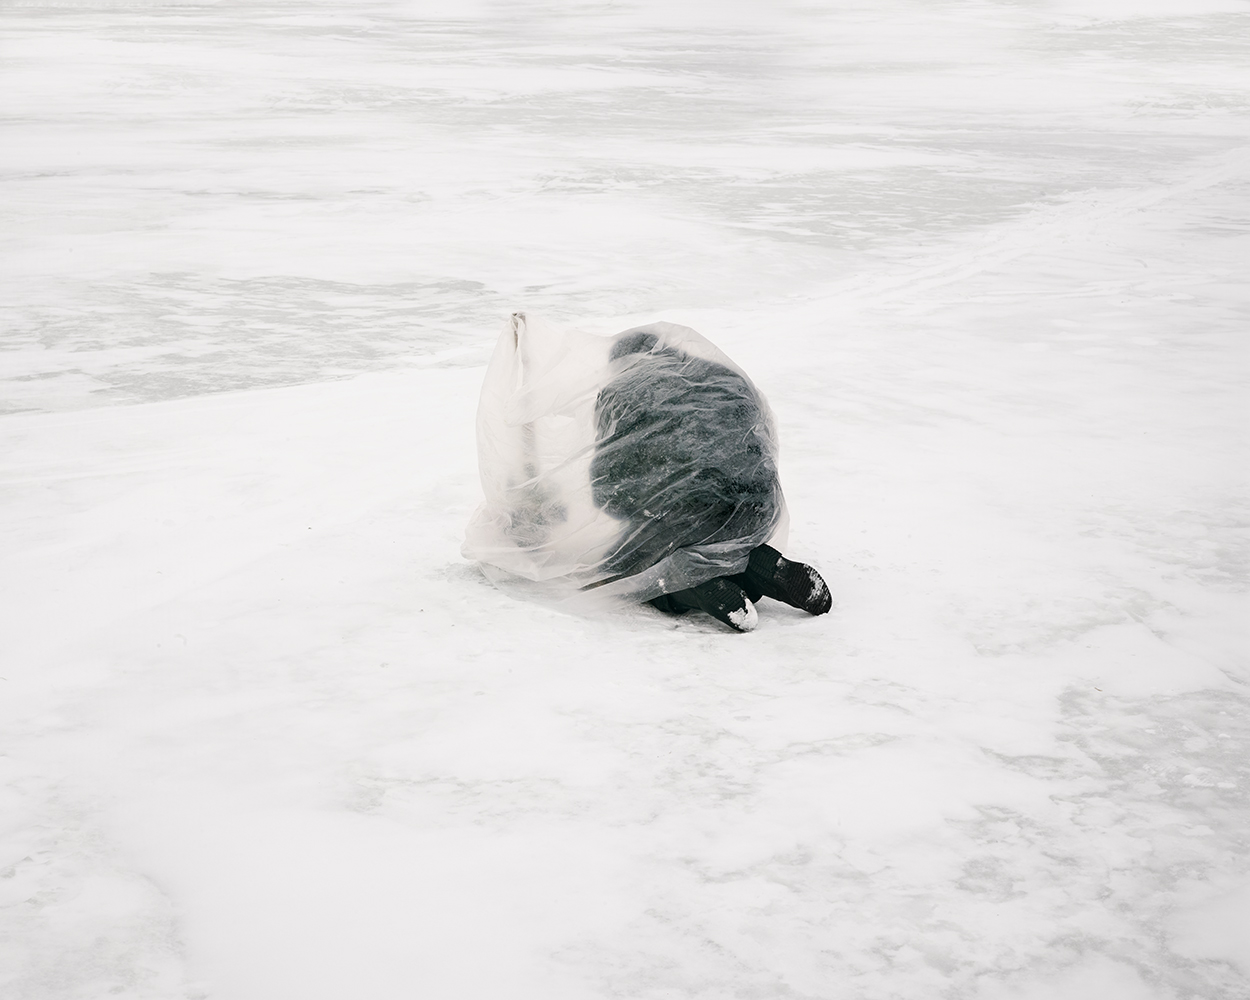   Untitled  from the series  Ice Fishers , 2016 